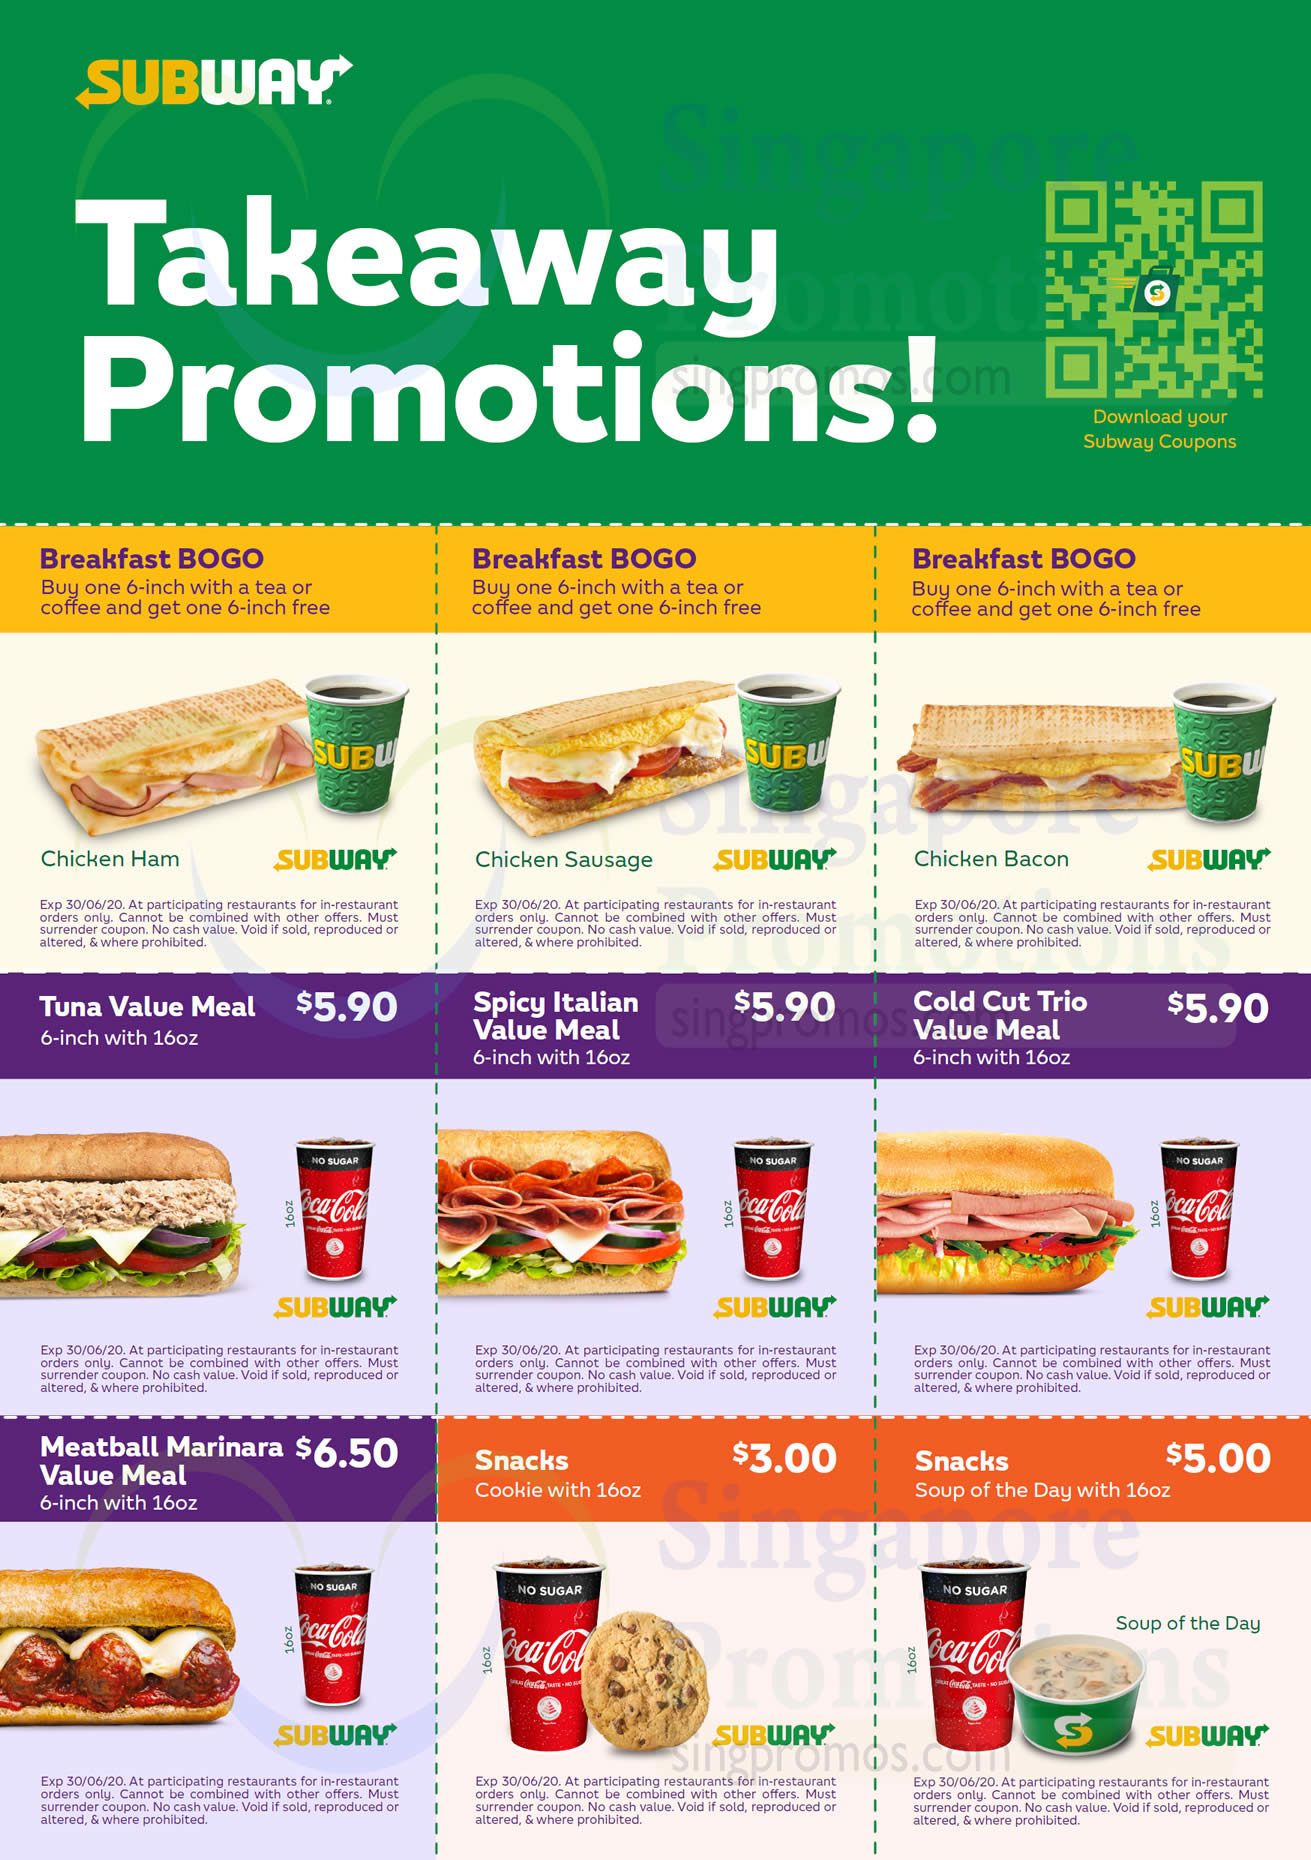 Subway extends their takeaway coupon deals including the 1for1